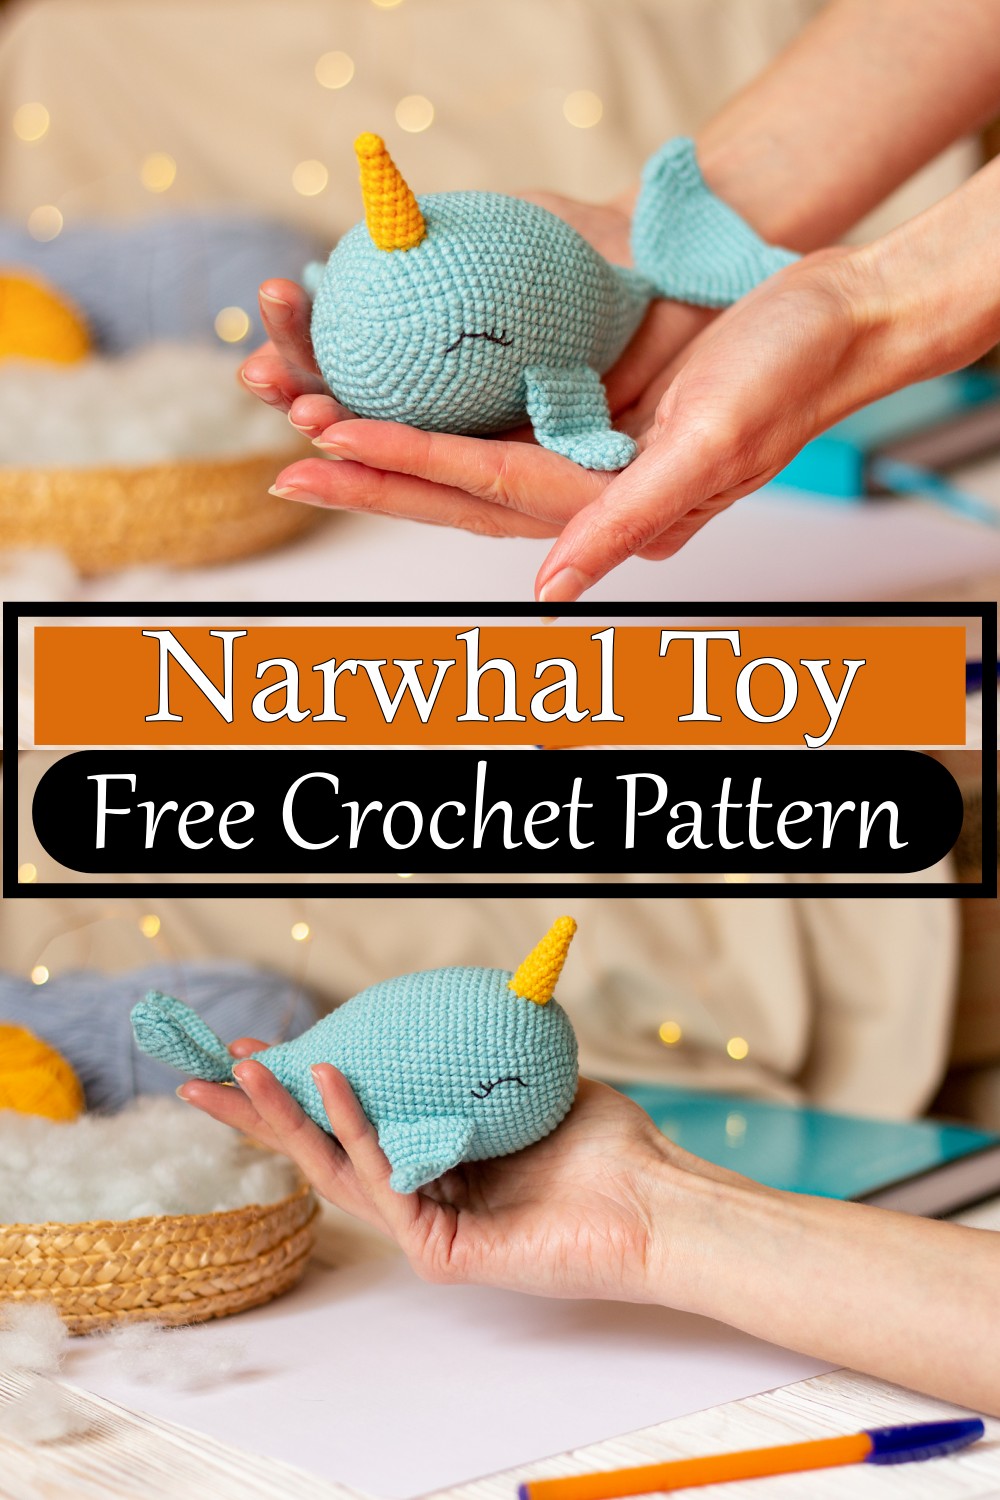 Crochet Narwhal Toy